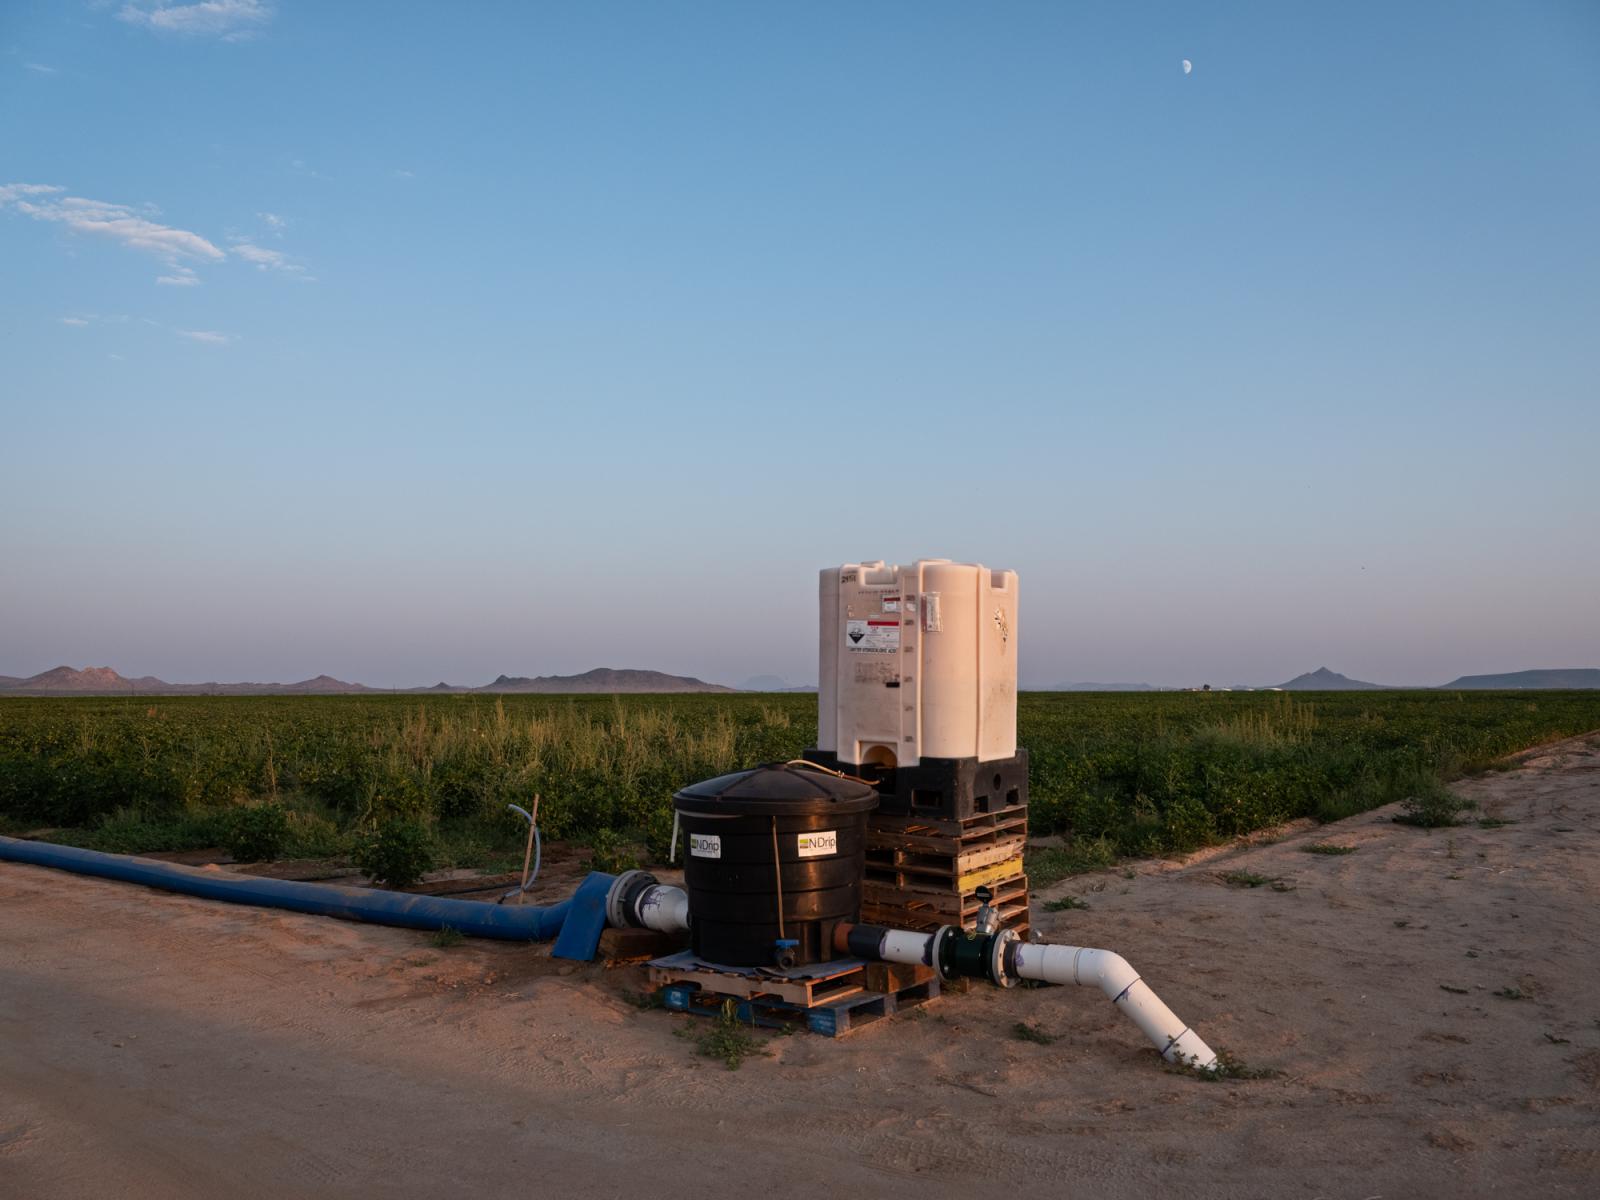 An N-Drip system feeds water into a cotton field.